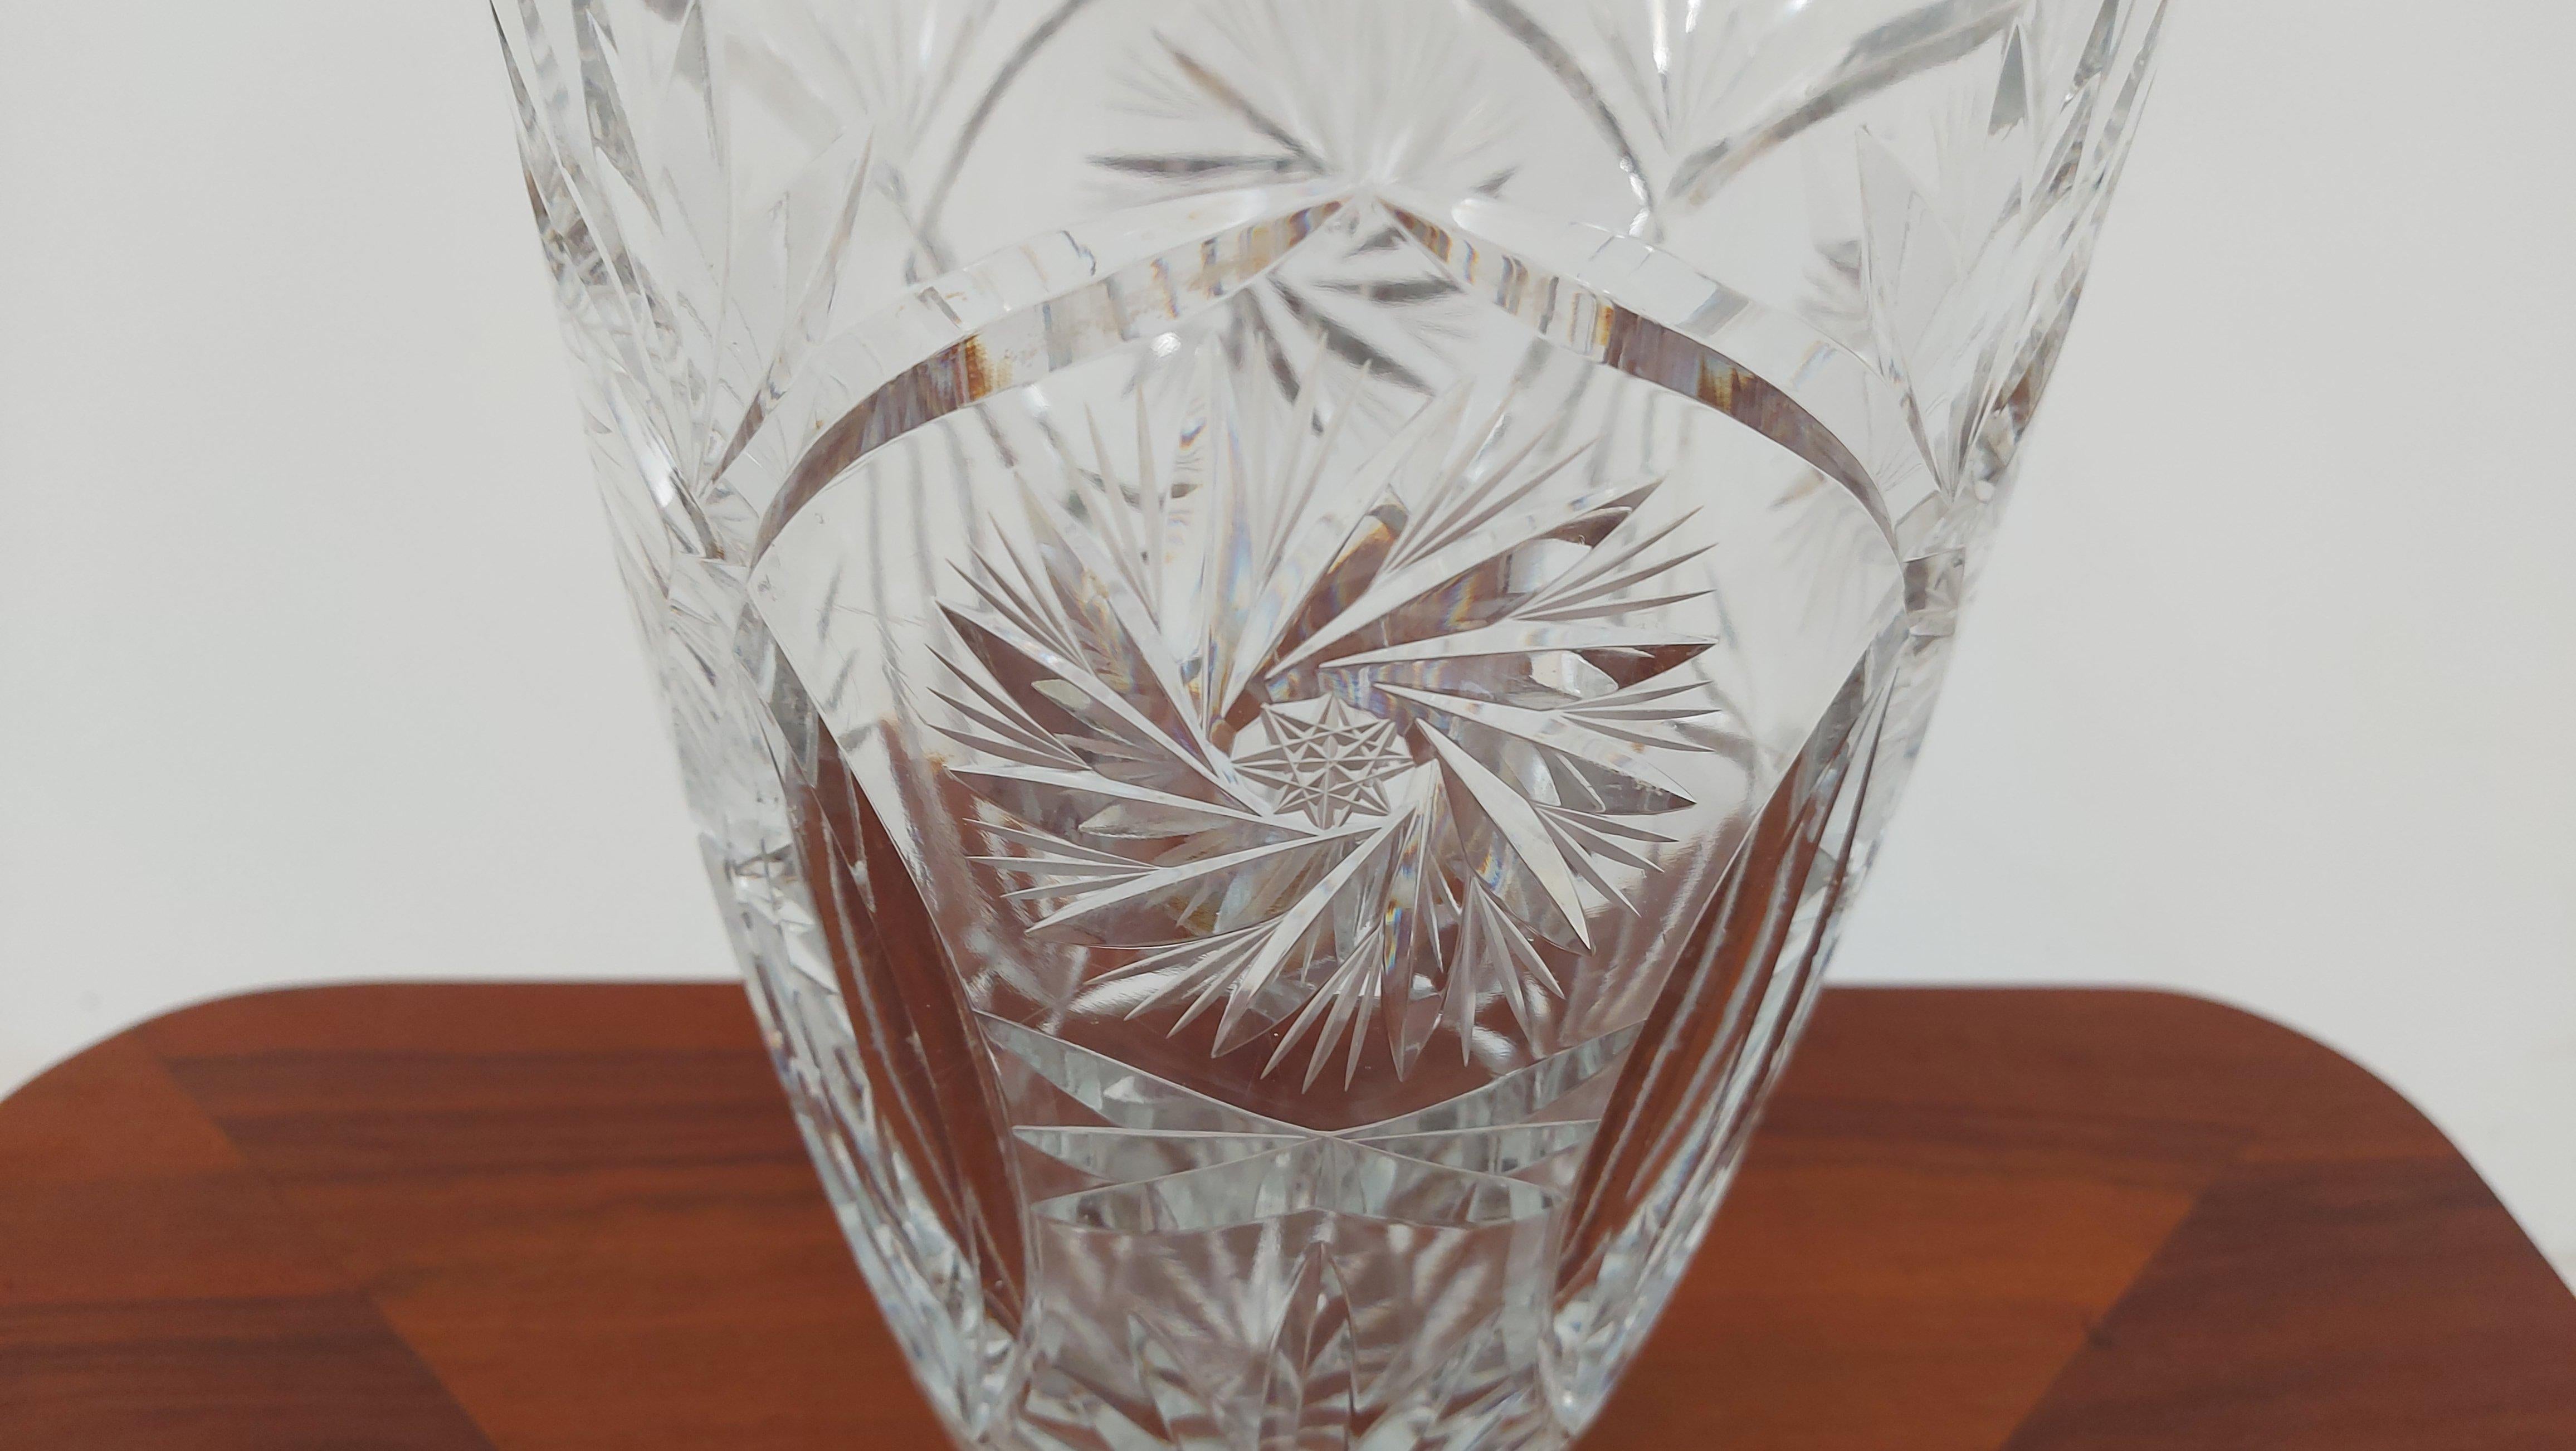 A large vase made of crystal. The vase was produced in Poland in the 1960s and 1970s.

Very good condition of the vase, no damage.

Measures: Height 29.5 cm / diameter 18.5 cm.